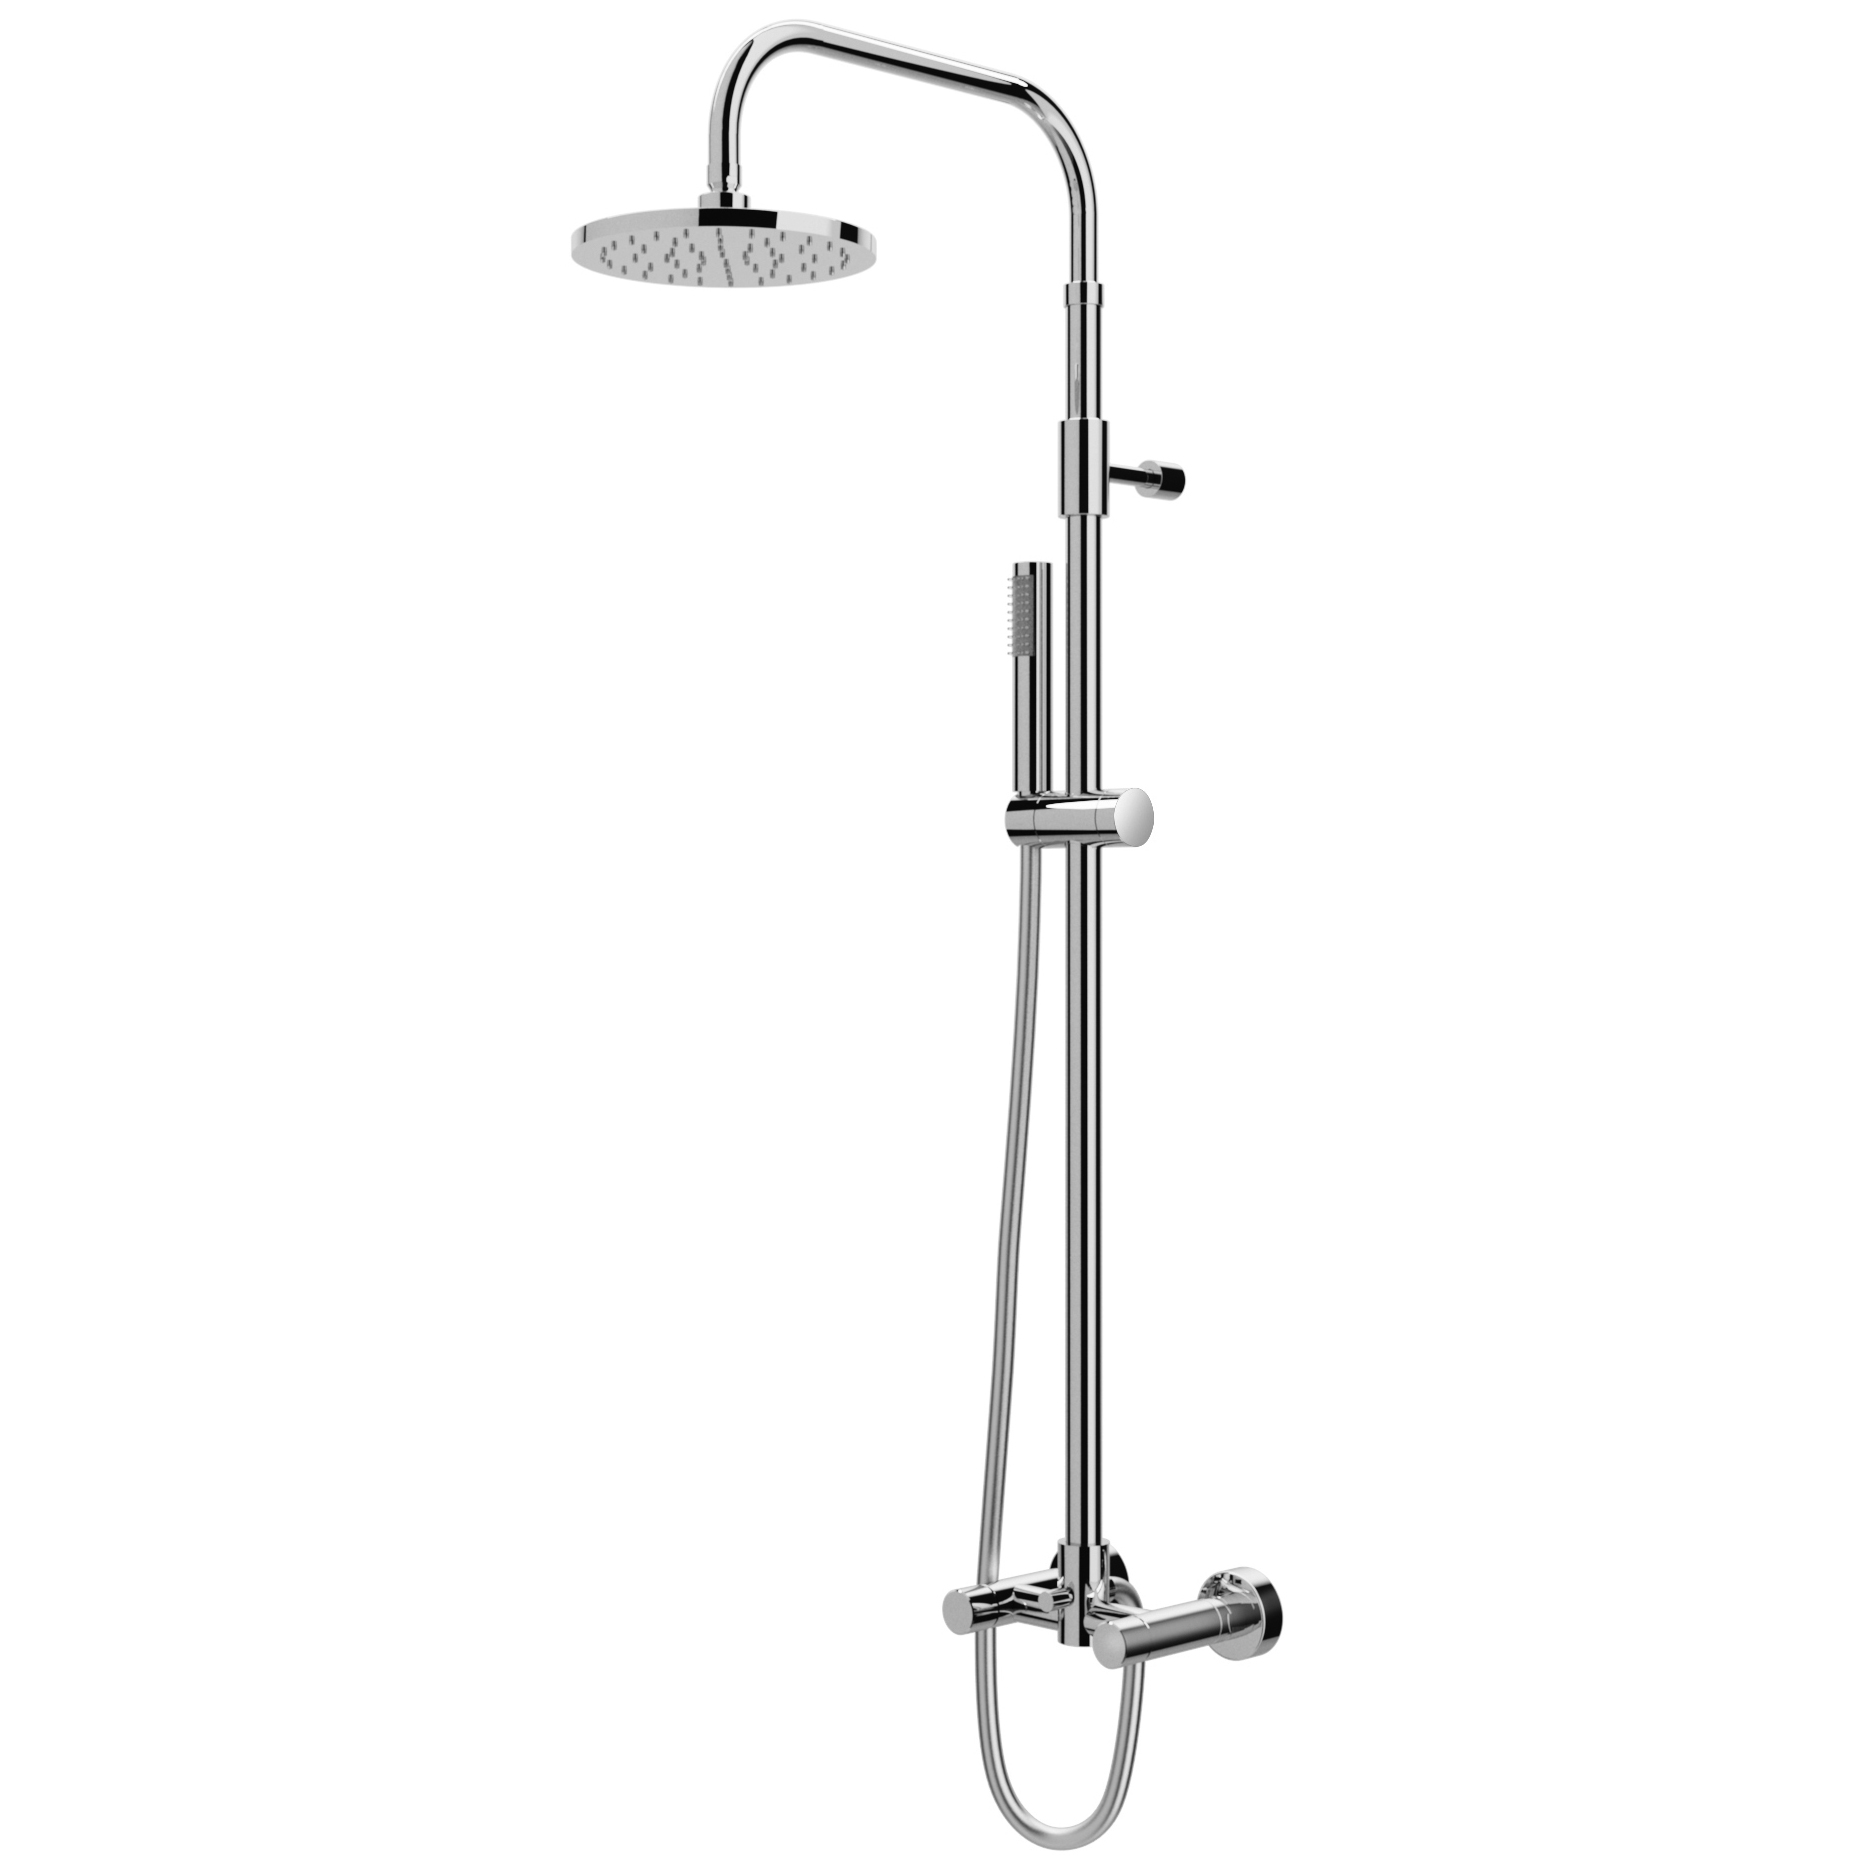 W50 316 Marine Grade Stainless Steel Wall Mount Shower with Hand Spray